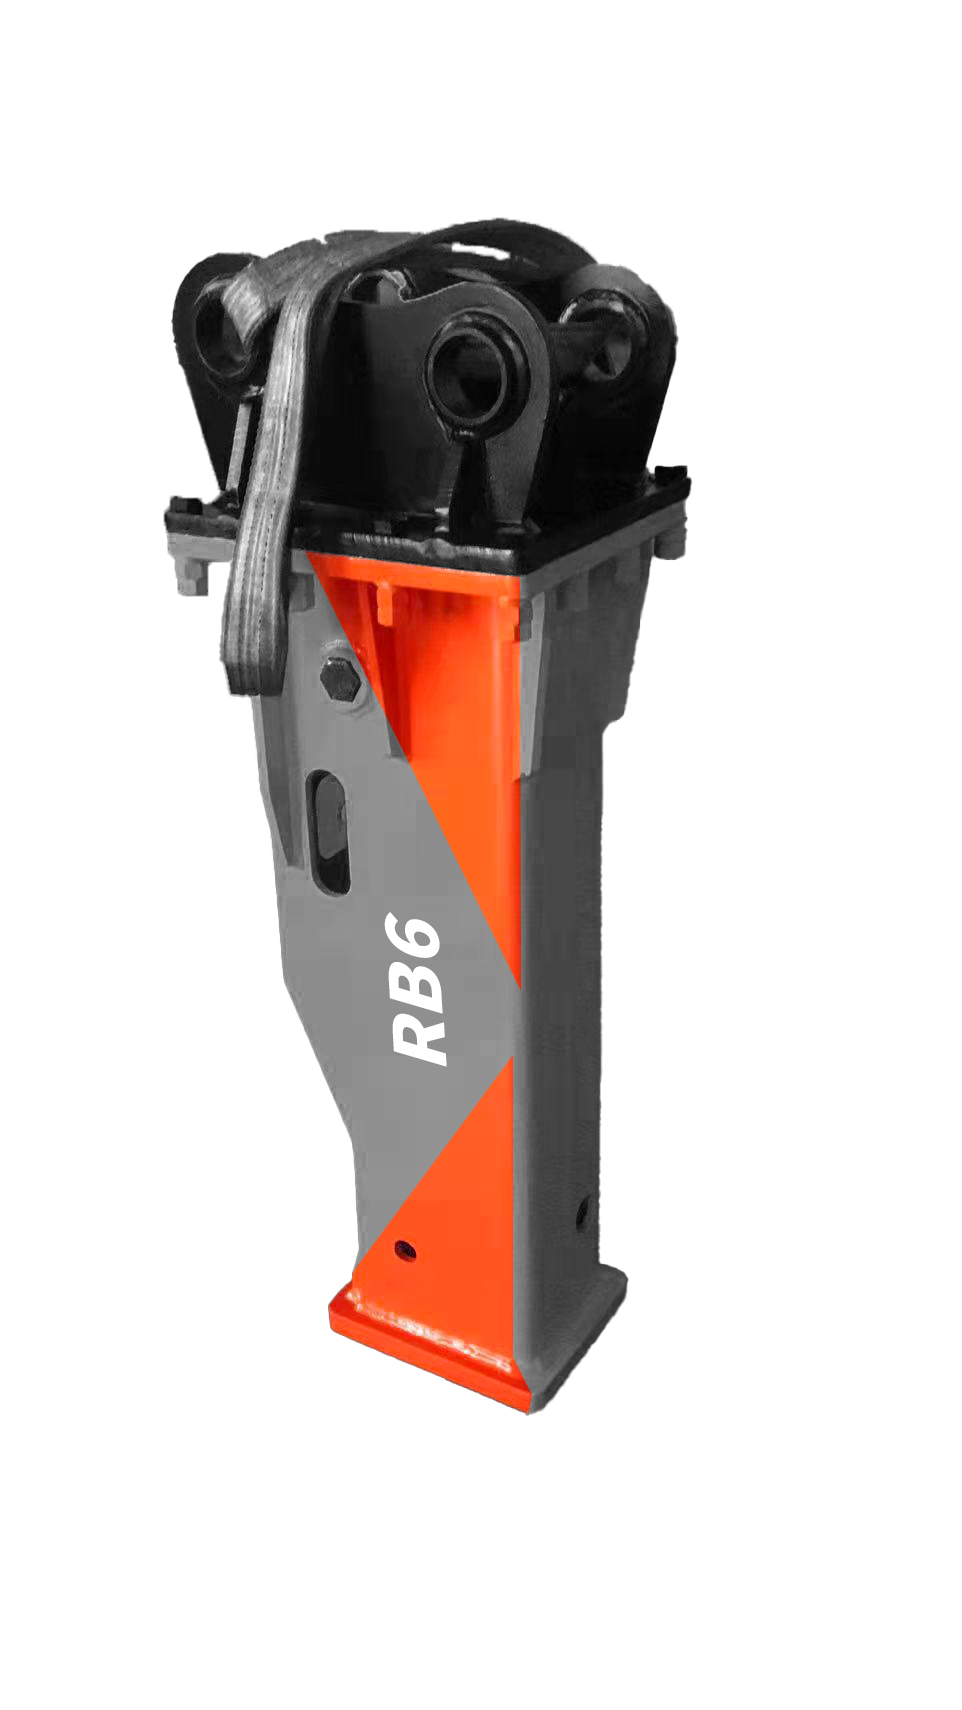 DEVELON Releases HB-series Hydraulic Breakers From: DEVELON (formerly Doosan Infracore North America) | For Construction Pros